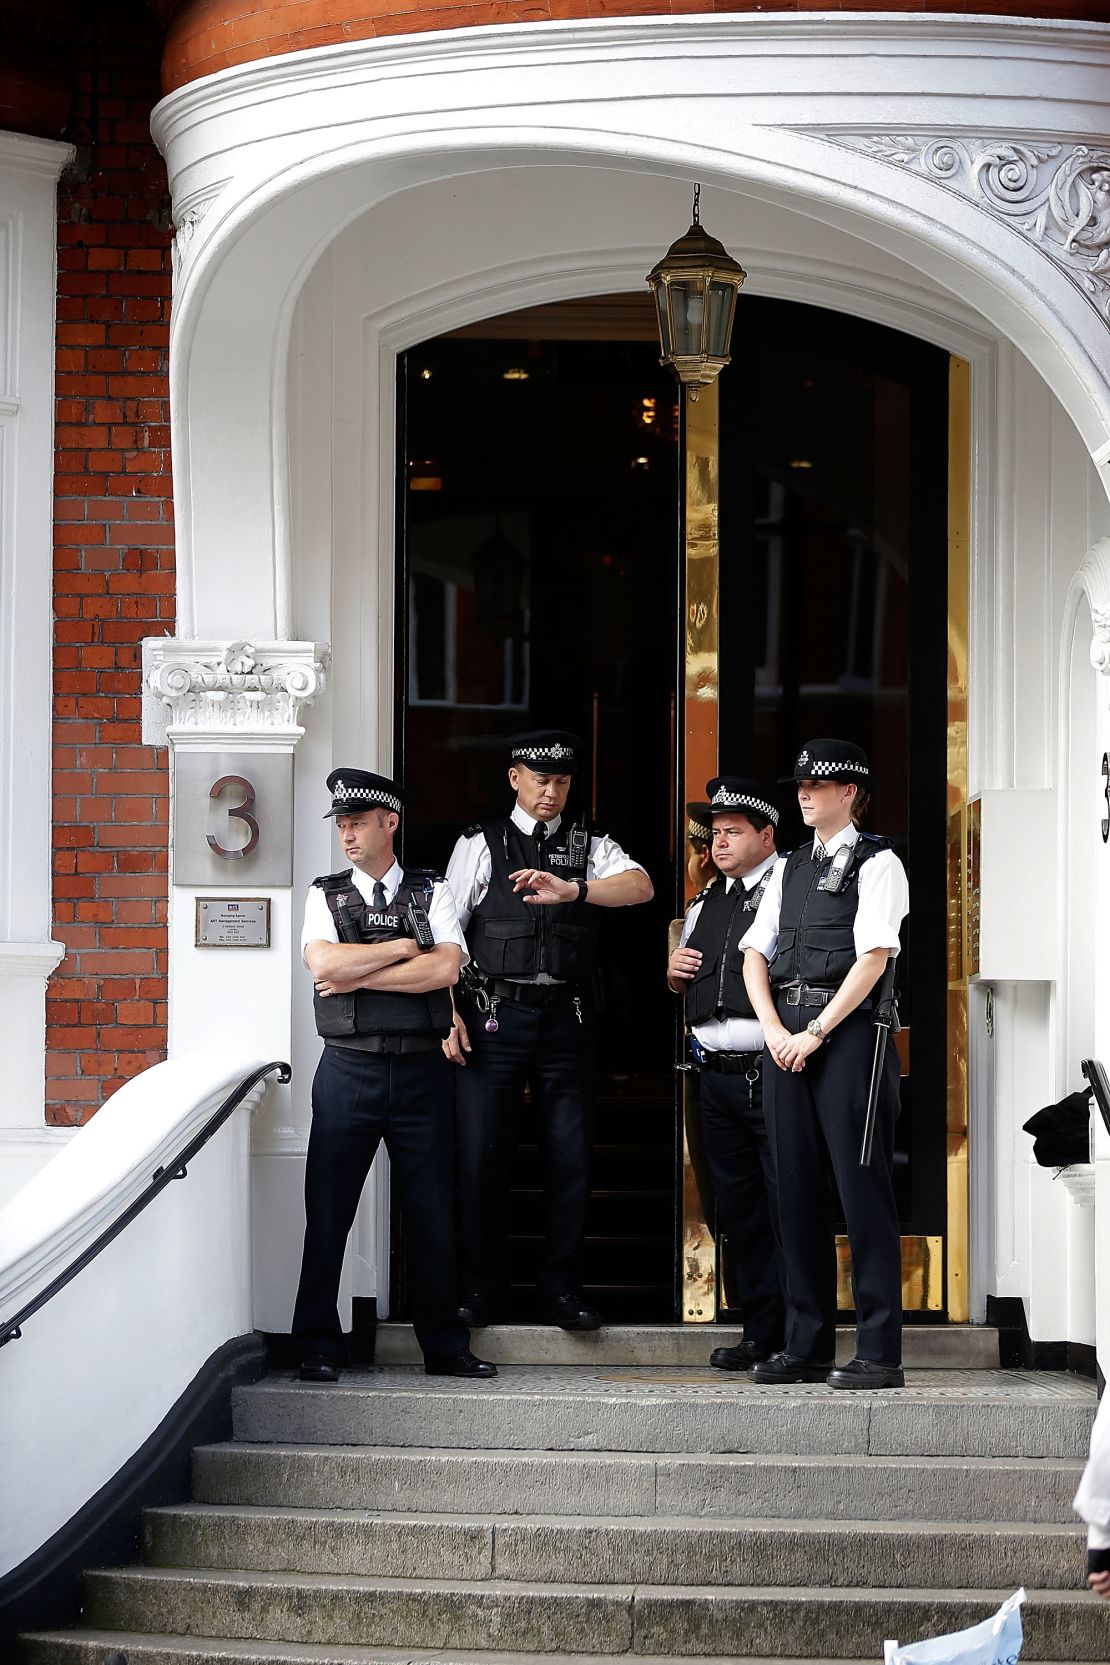 Police stand guard outside the Ecuadorian Embassy in London.